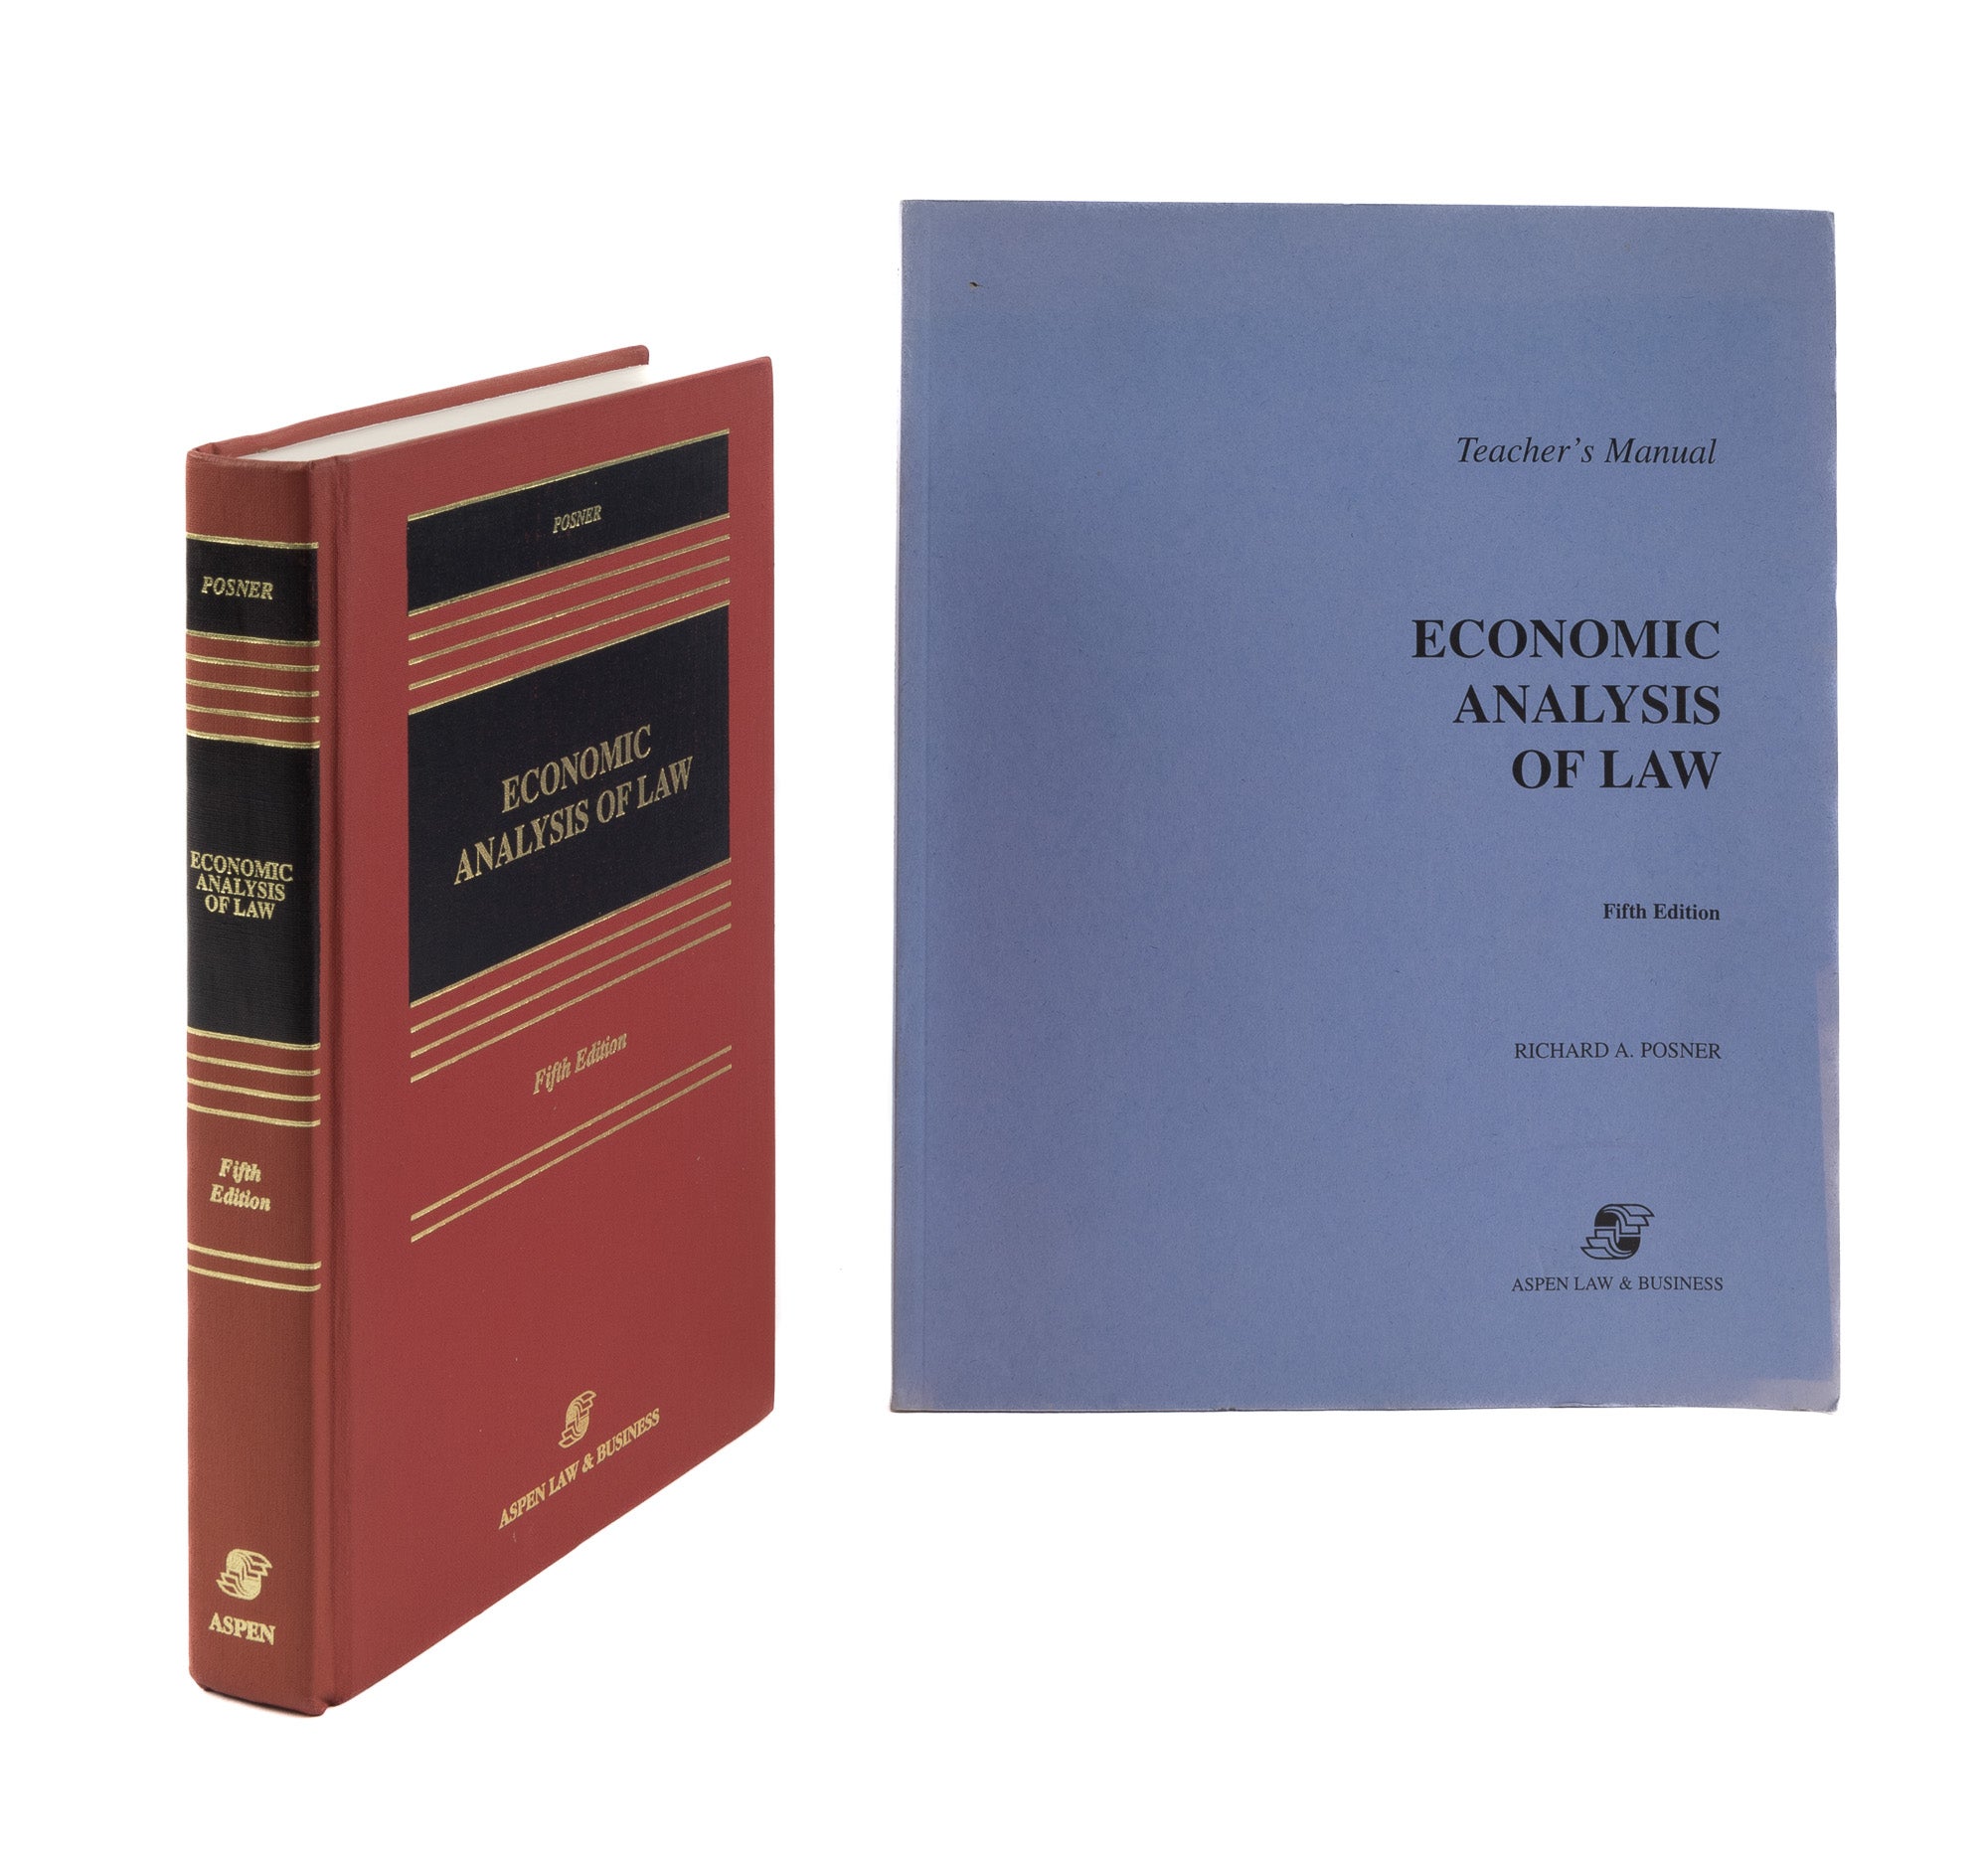 Economic Analysis of Law, Fifth Edition with Teacher's Manual 